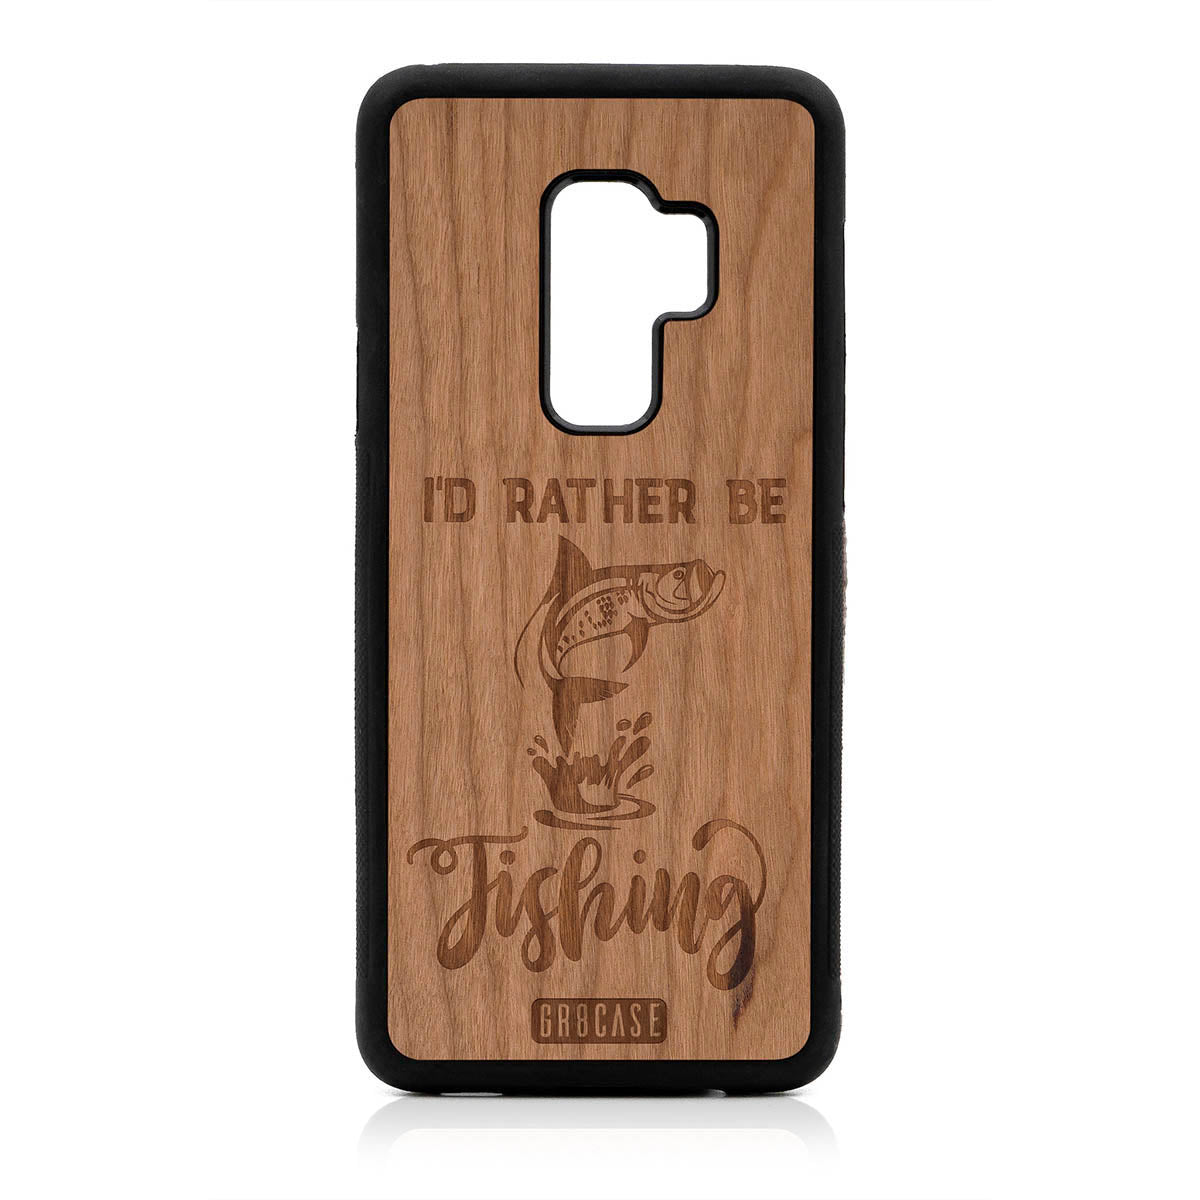 I'D Rather Be Fishing Design Wood Case For Samsung Galaxy S9 Plus